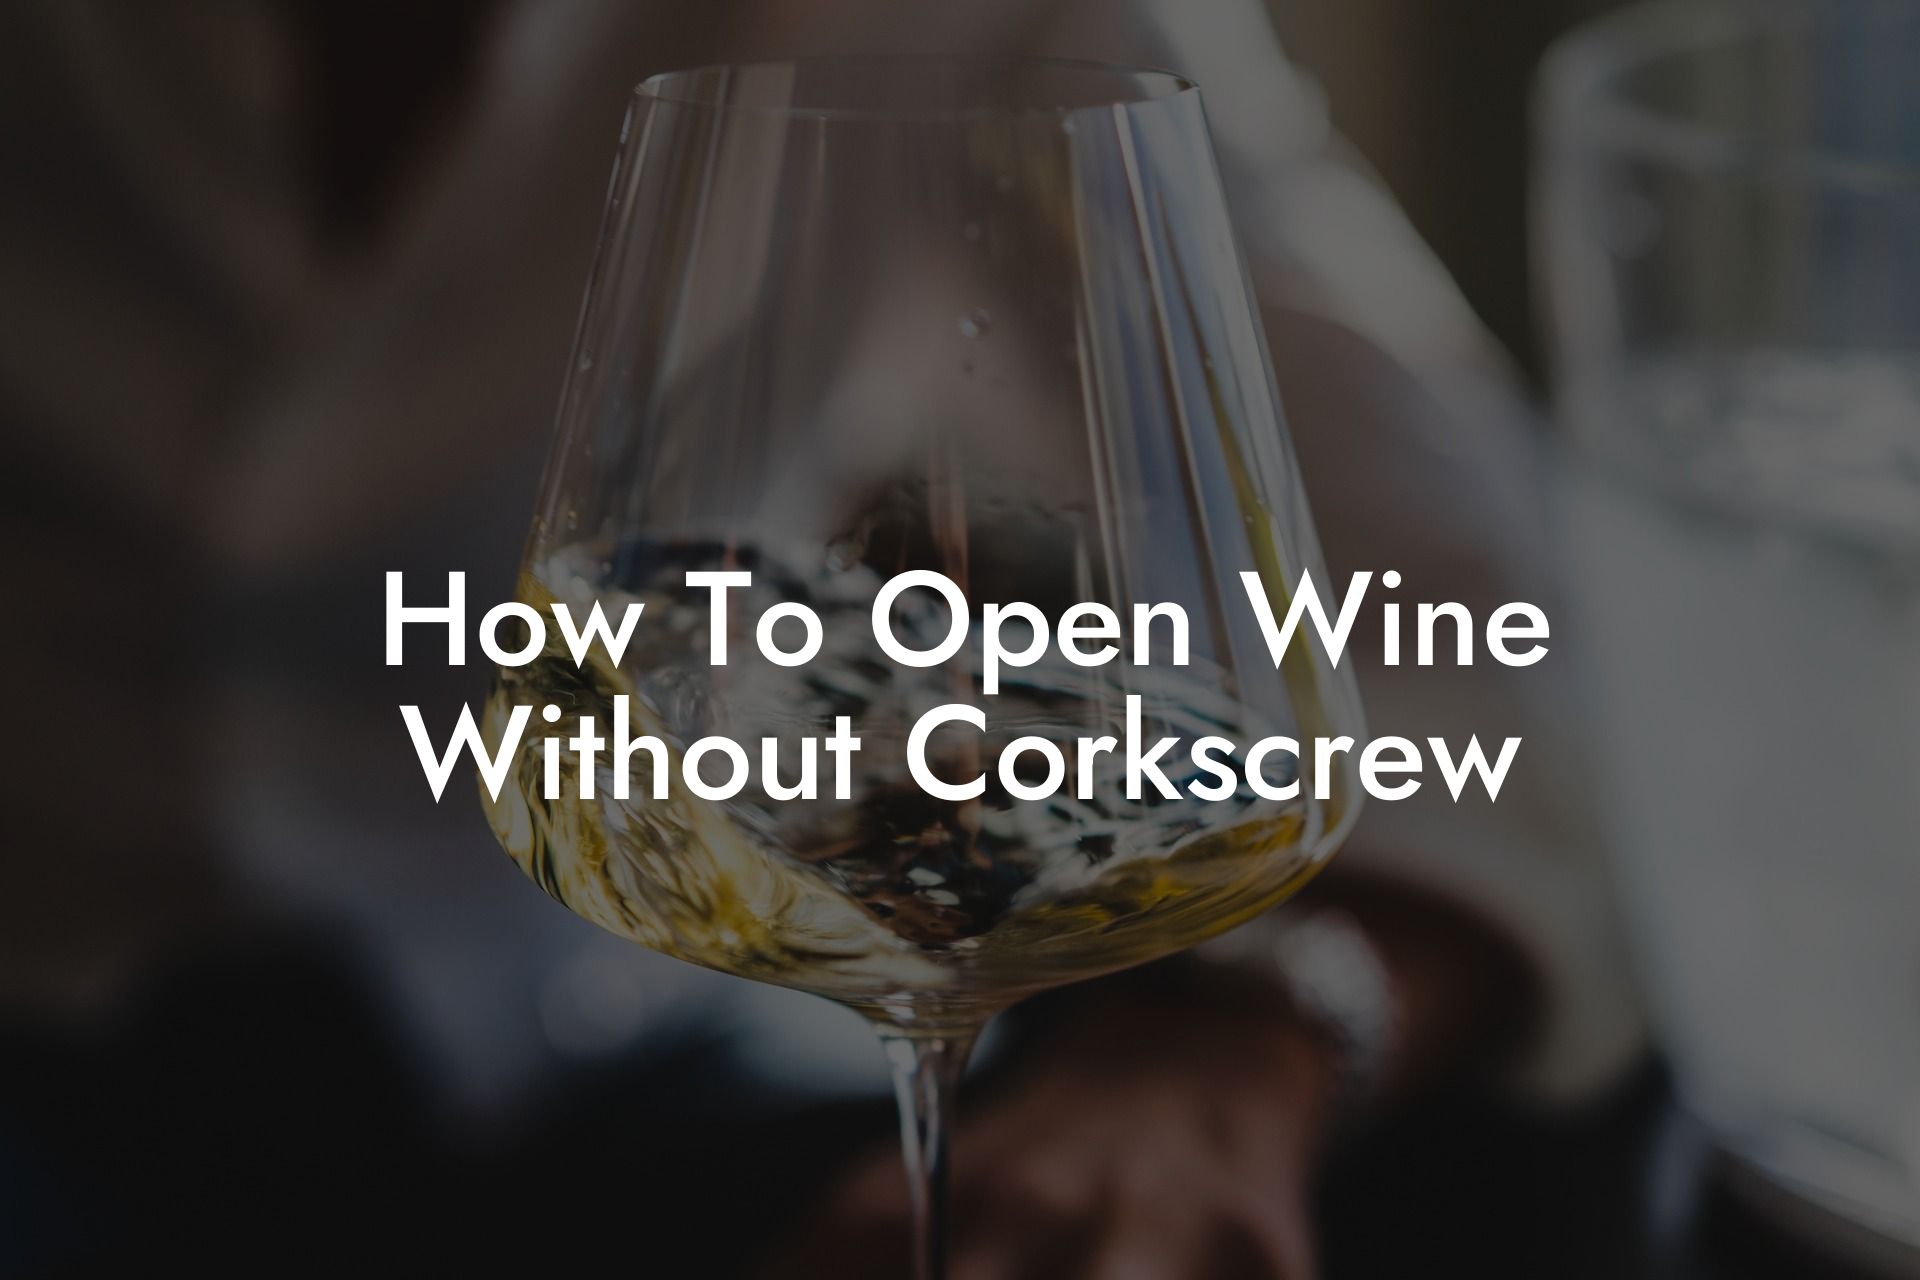 How To Open Wine Without Corkscrew